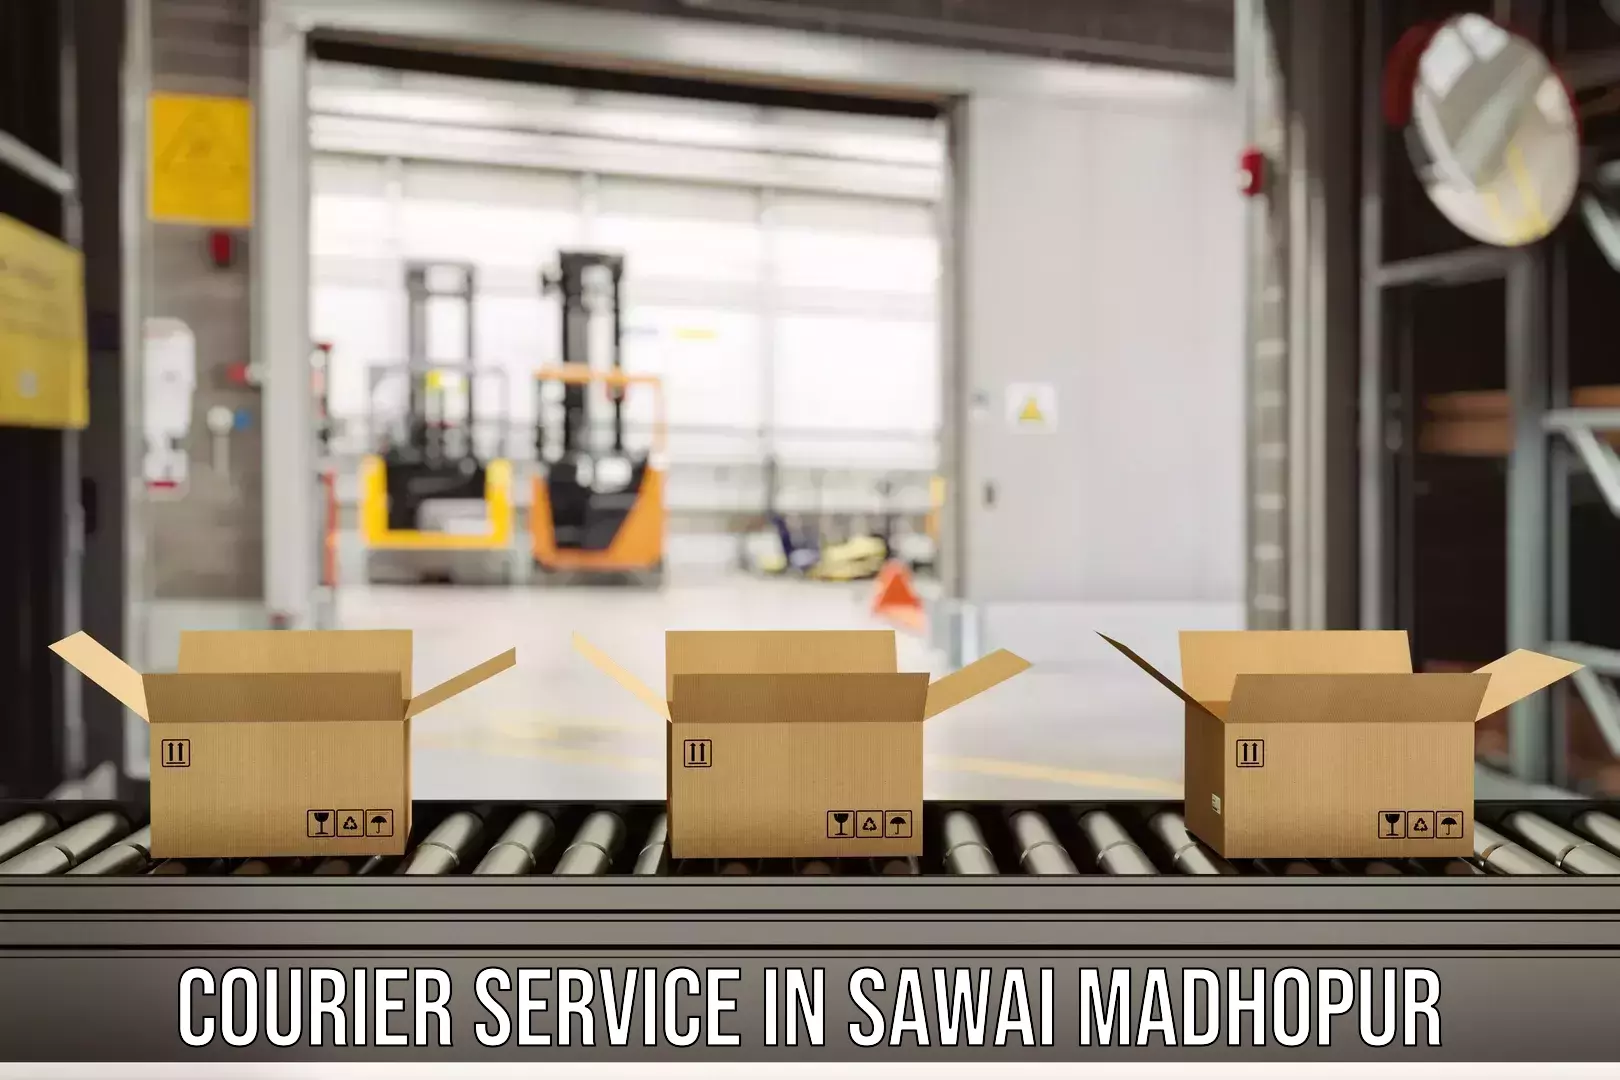 Personal courier services in Sawai Madhopur